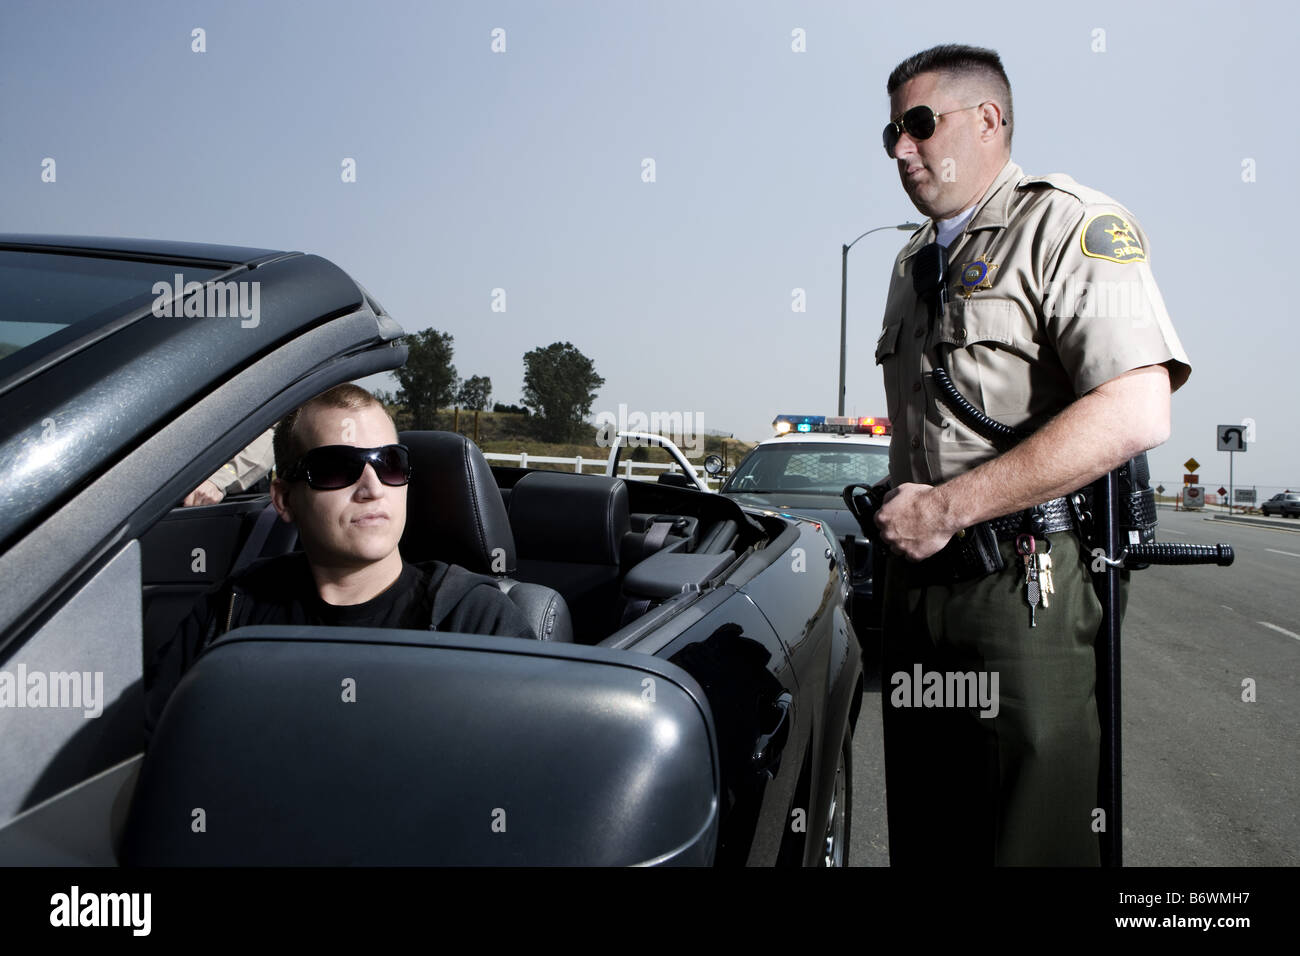 Police officer standing by man in Mustang Stock Photo